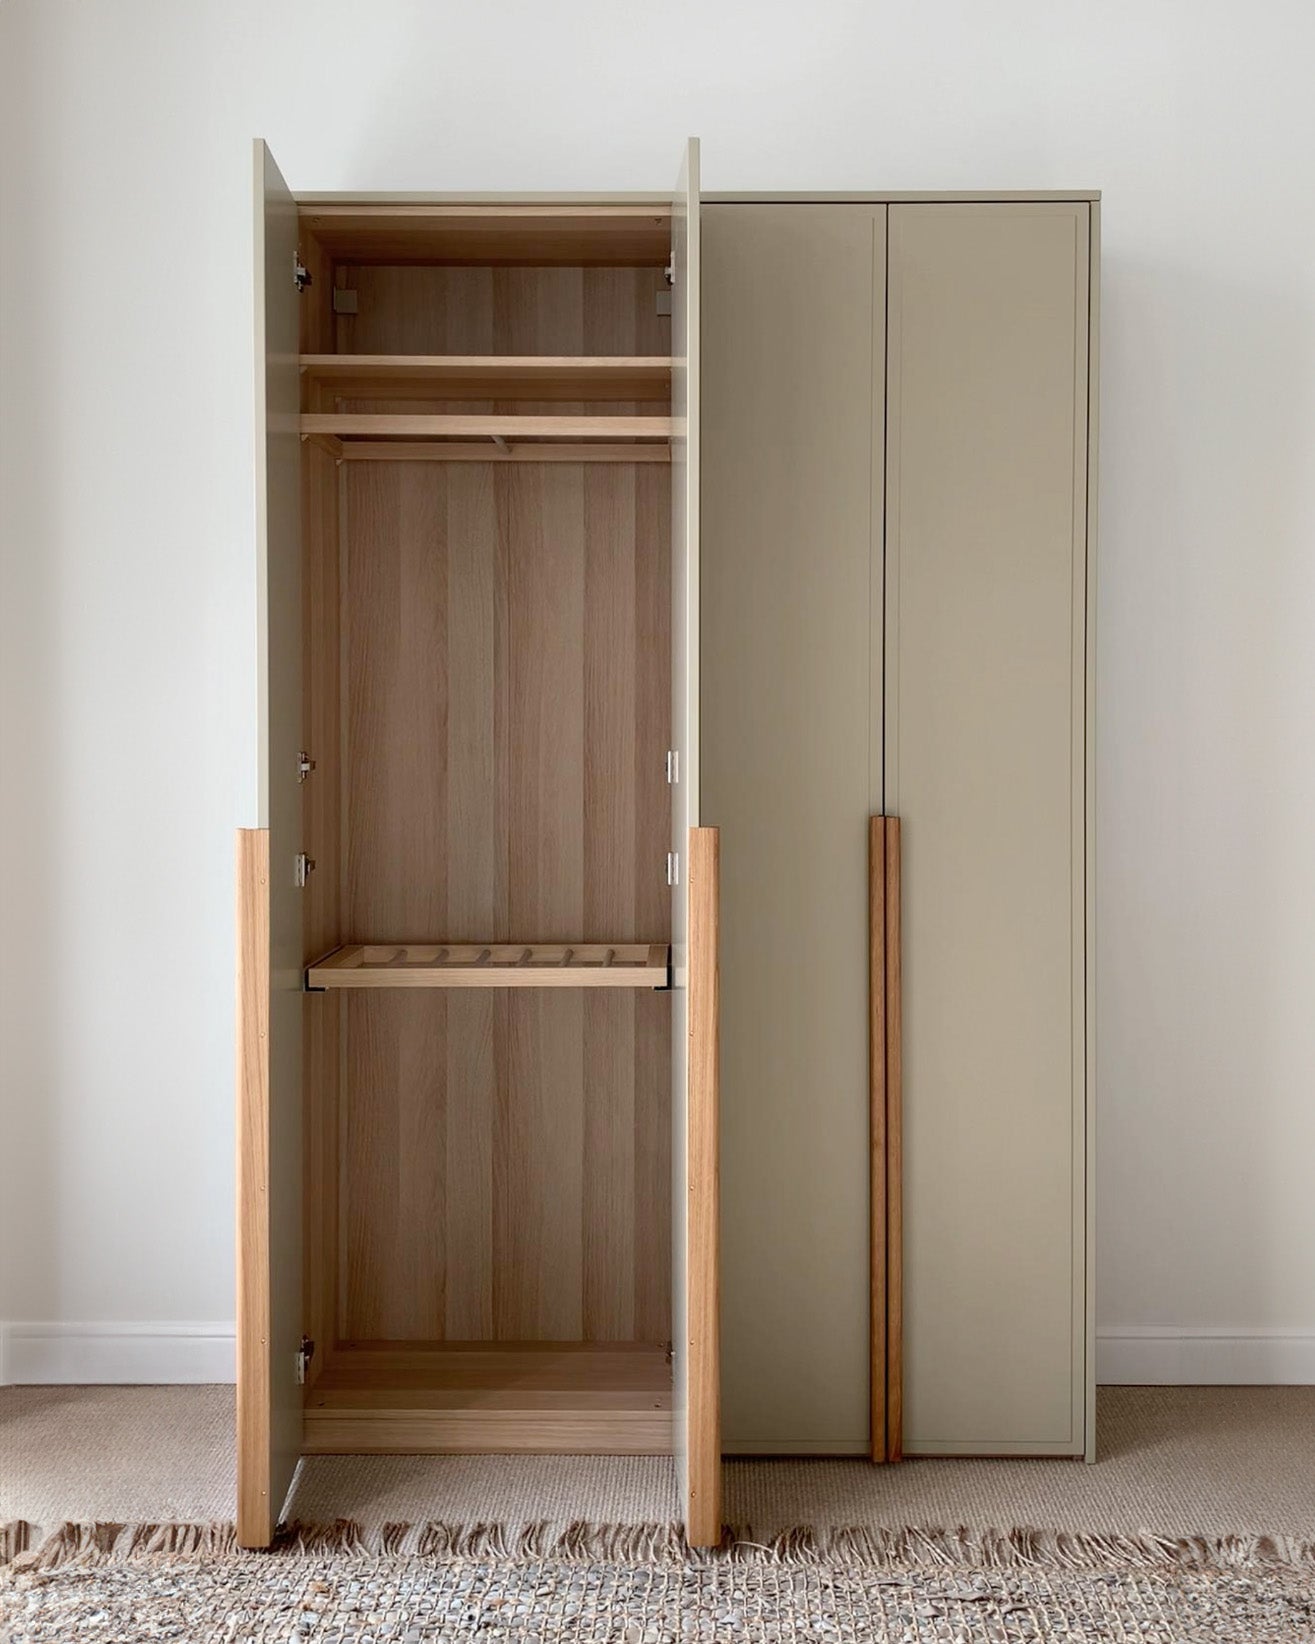 A.S.Helsingö Lalax wardrobe in ash green colour with Ikea Pax frame inside